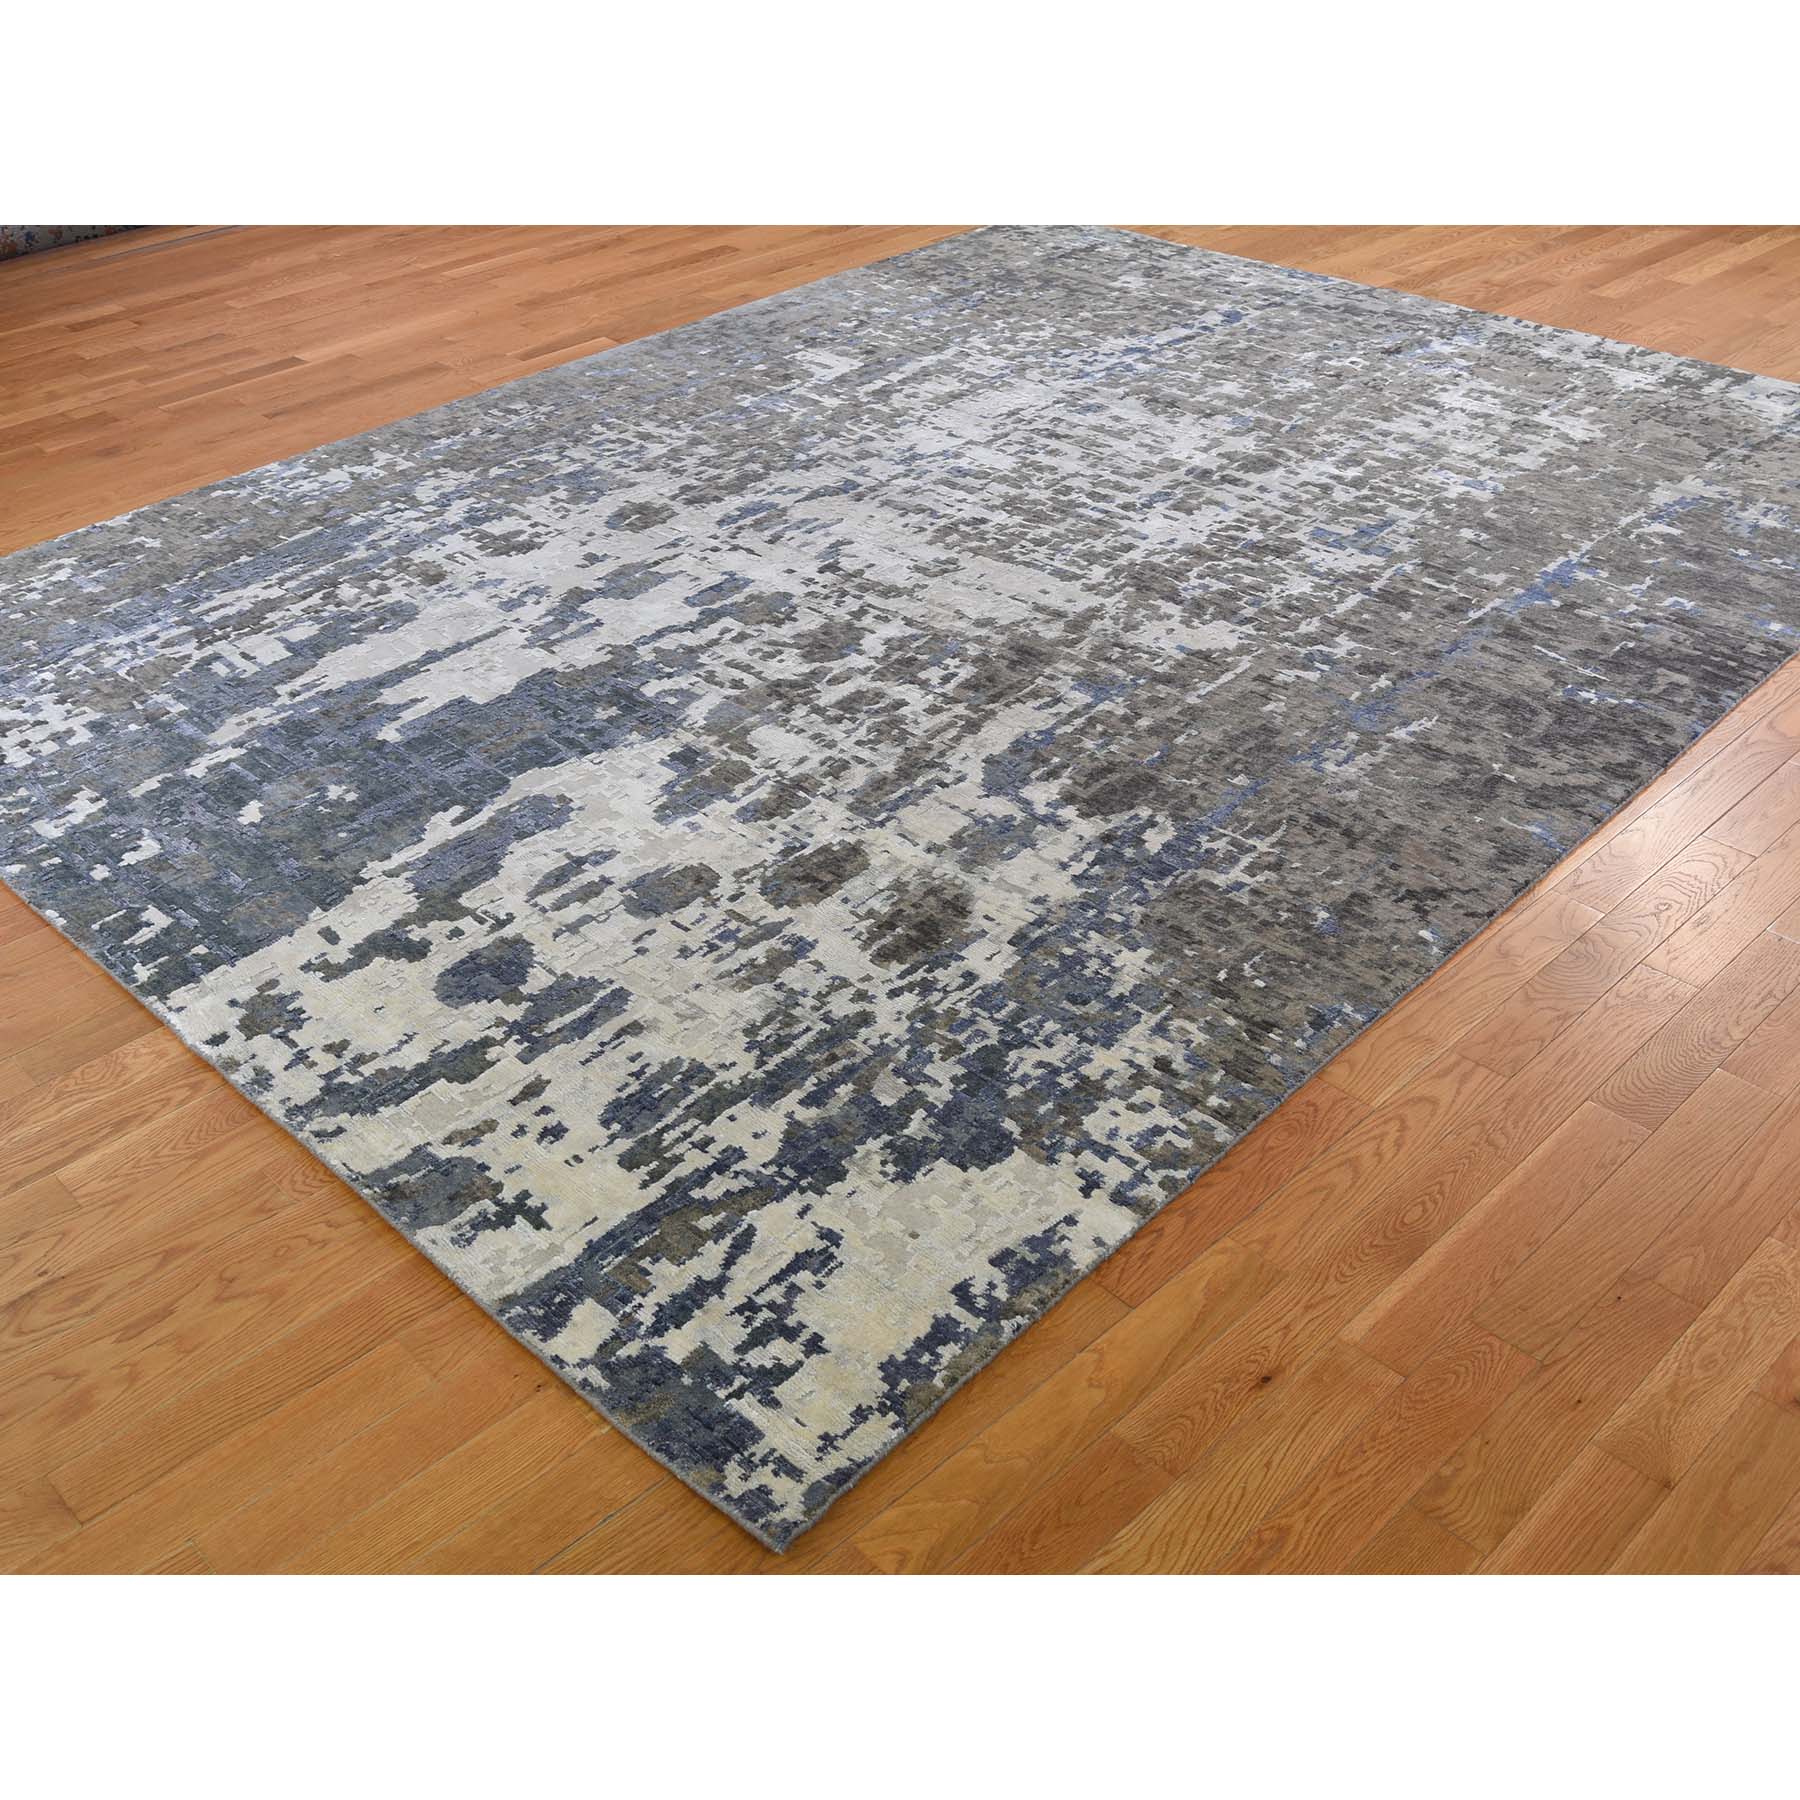 9-x11-10  Hi-Low Pile Abstract Design Wool And Silk Hand-Knotted Oriental Rug 